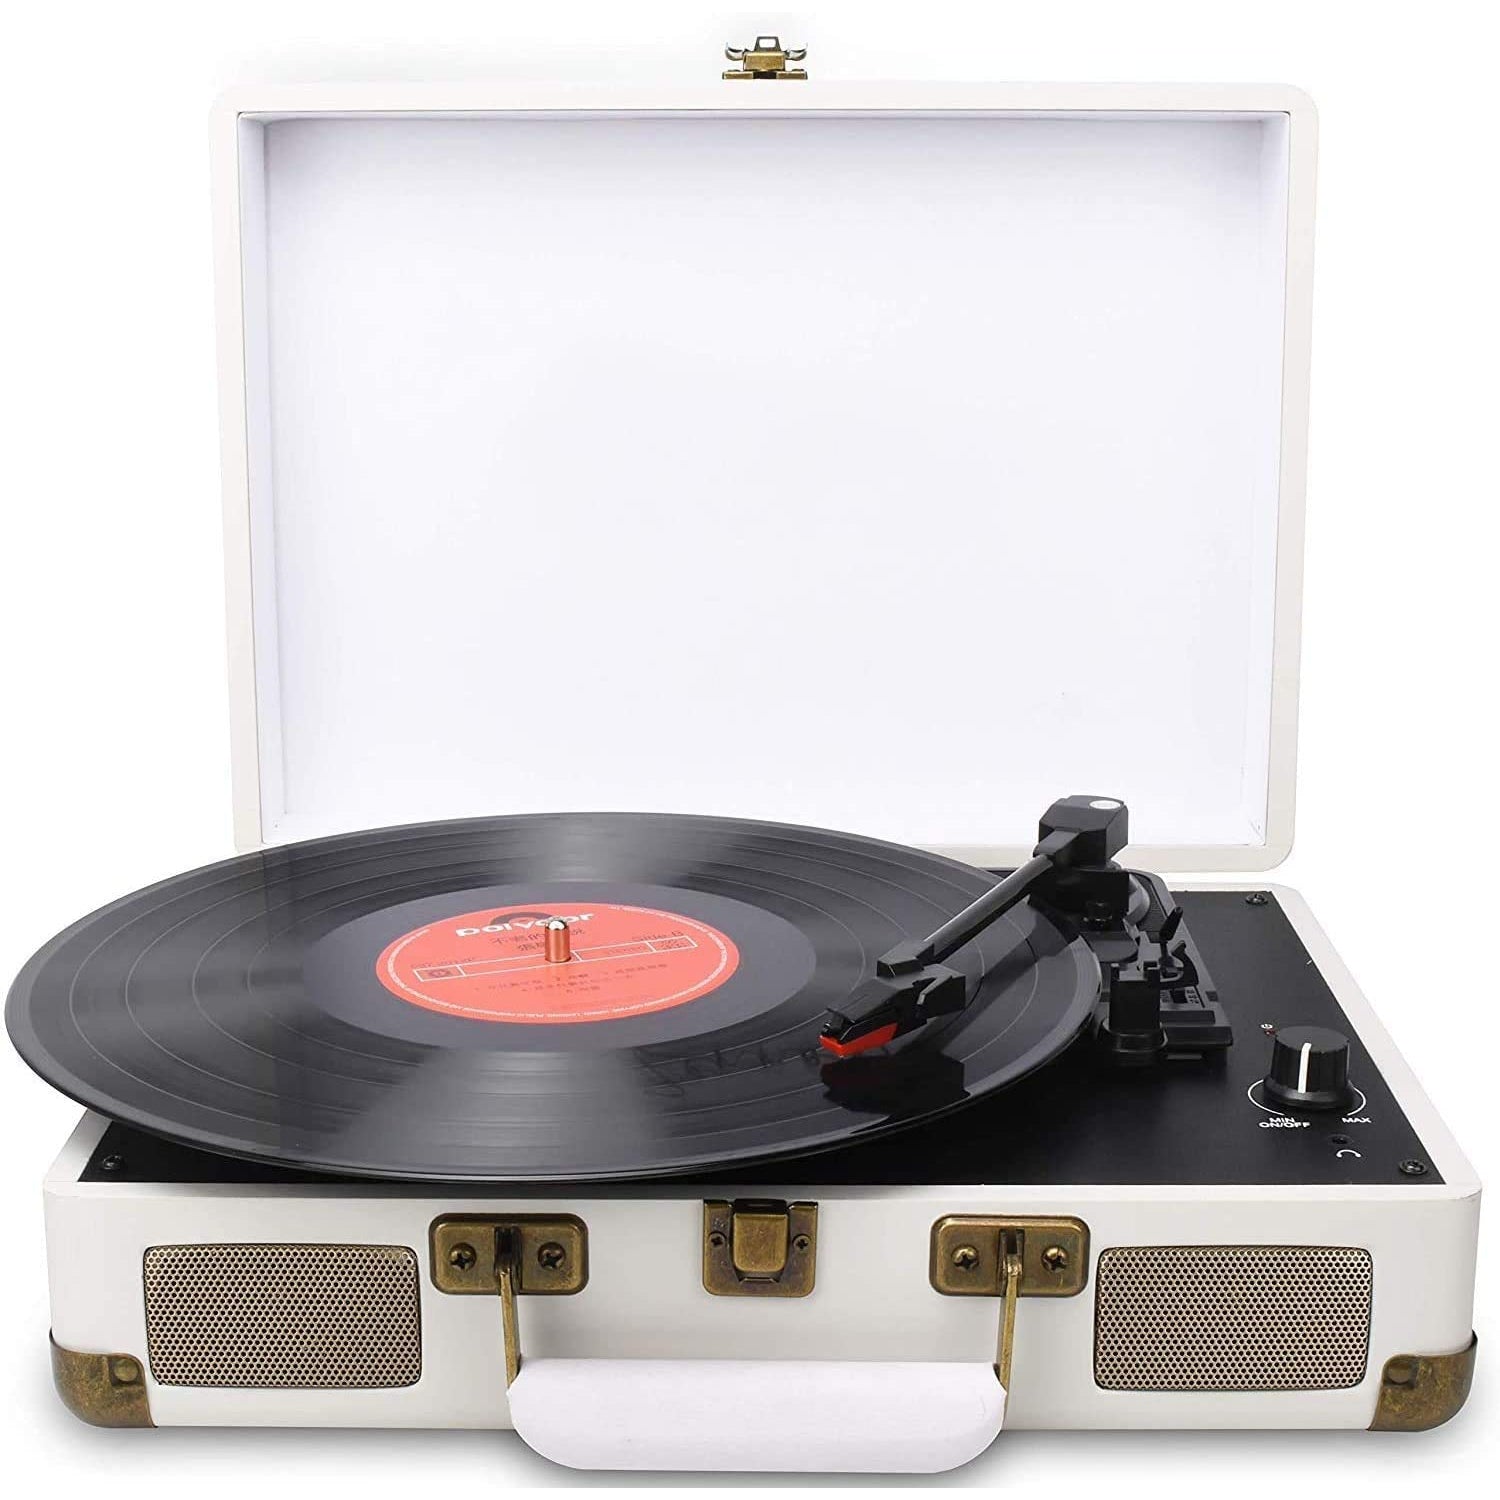 Digitnow Three Speeds Turntable Retro Record Player with Built-in Stereo Speakers, Supports USB, Headphone Jack ,Suitcase Design